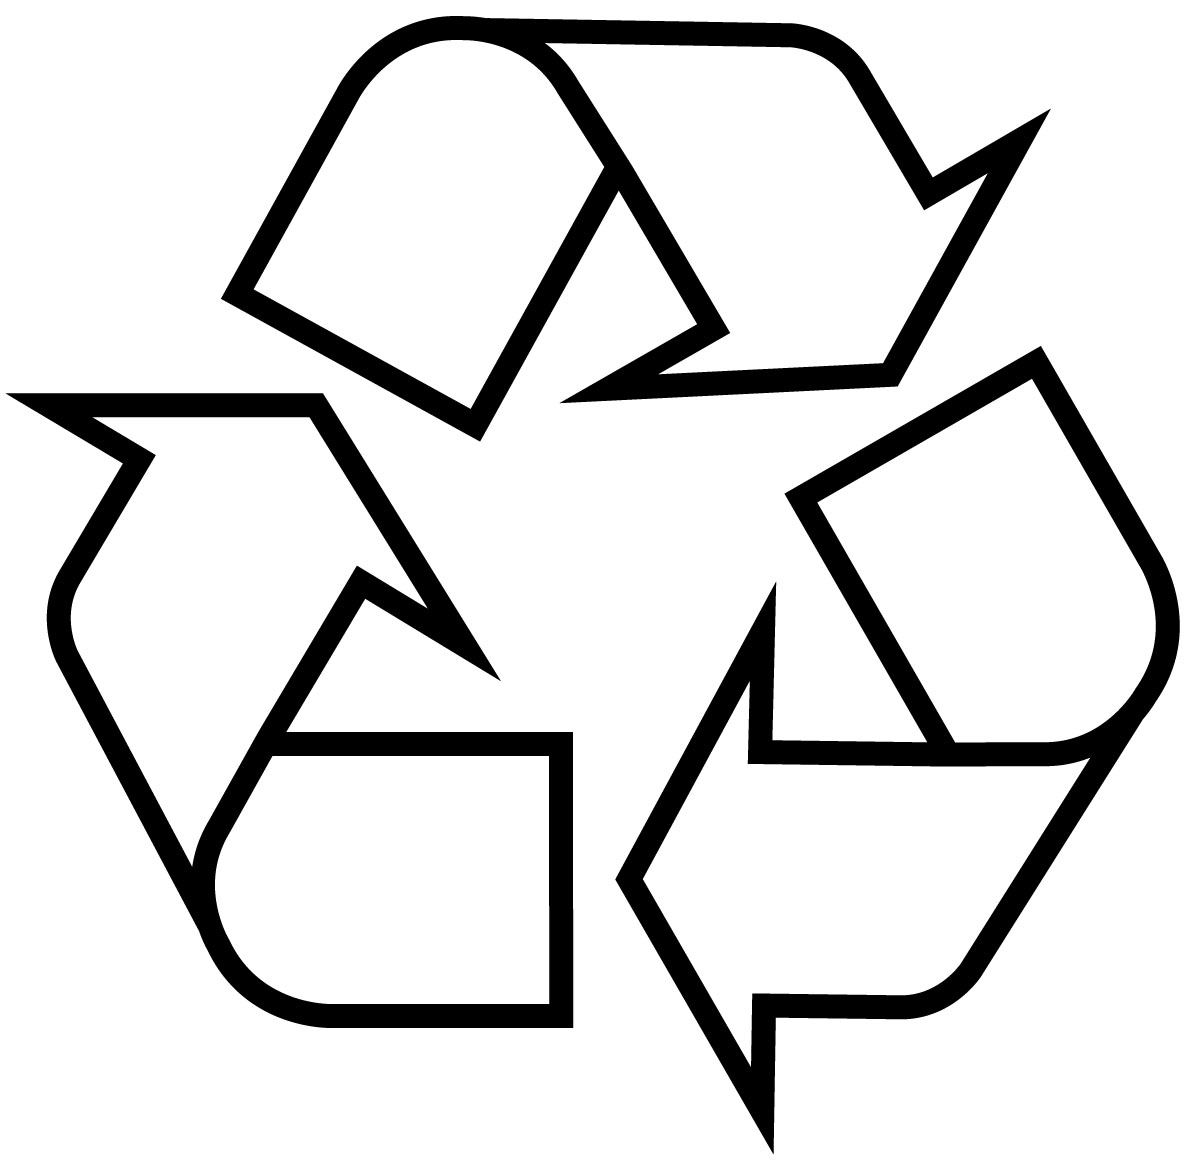 Recycle Icon Vector Free Download - ClipArt Best